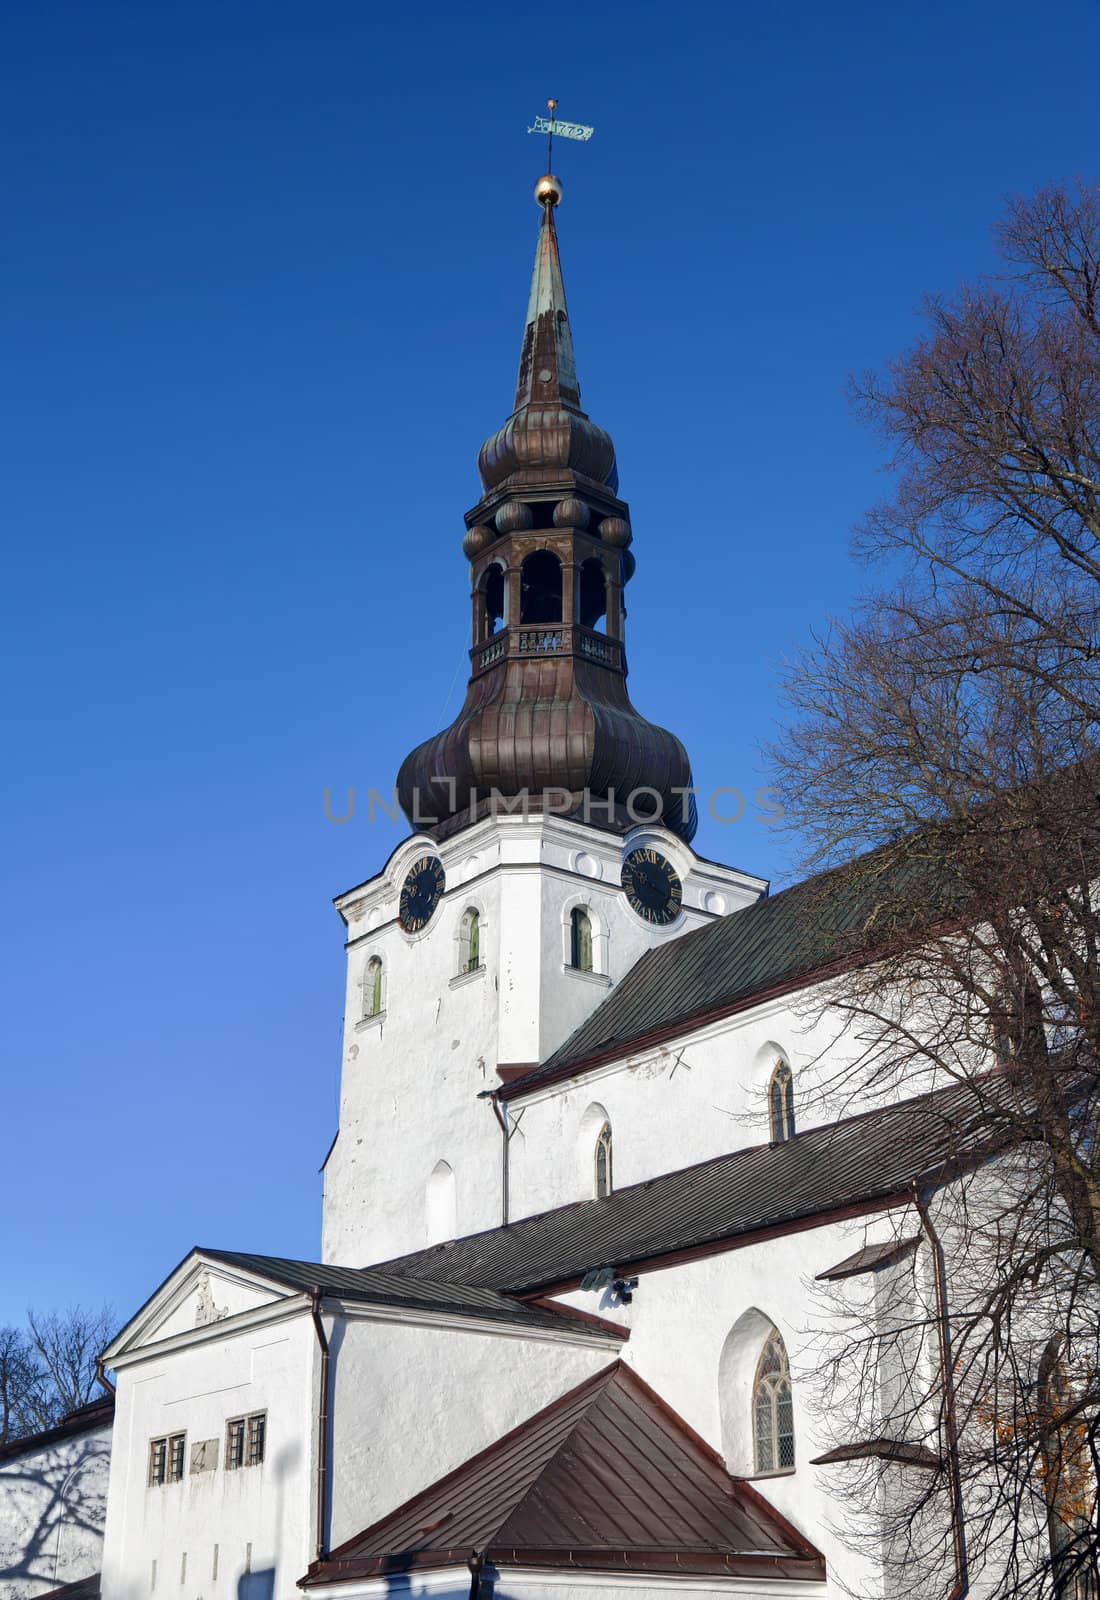 Bronze spire on Dome church by steheap